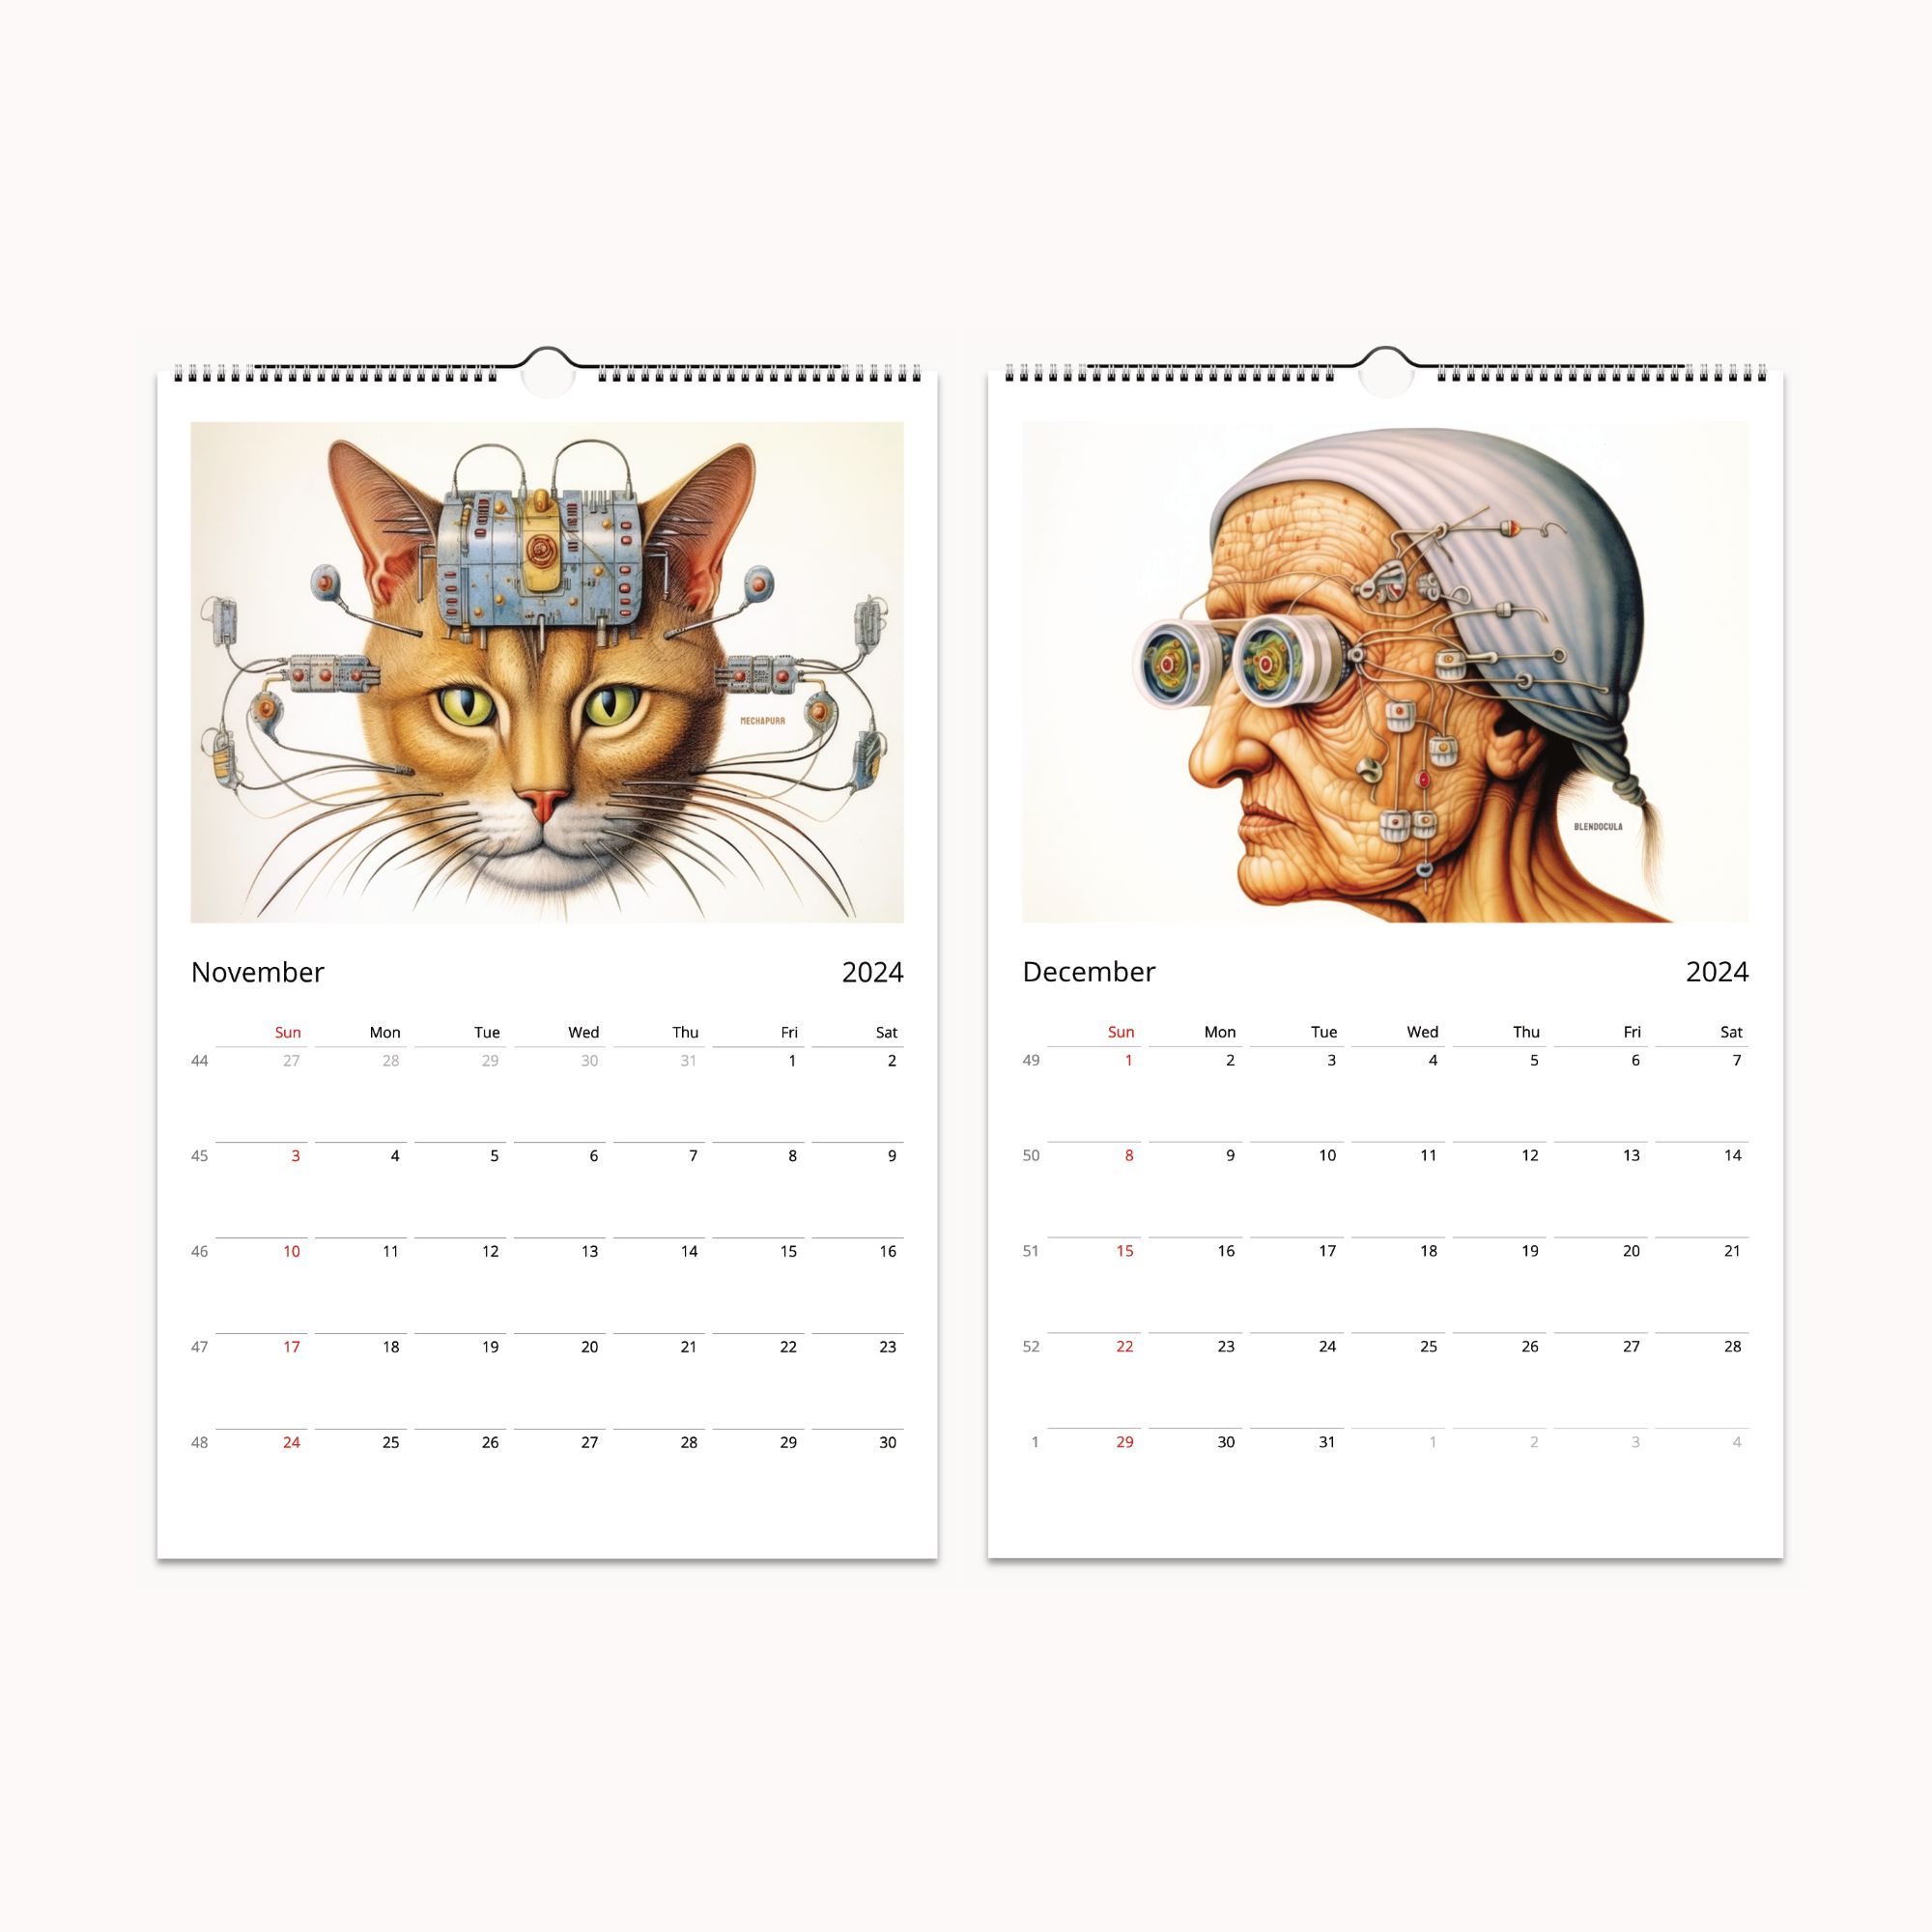 2024 Wall Calendar featuring 'Compendium Serafinitas': Surreal landscapes and creatures fill each month, inviting discovery and wonder, with space for notes and potential for framed art.